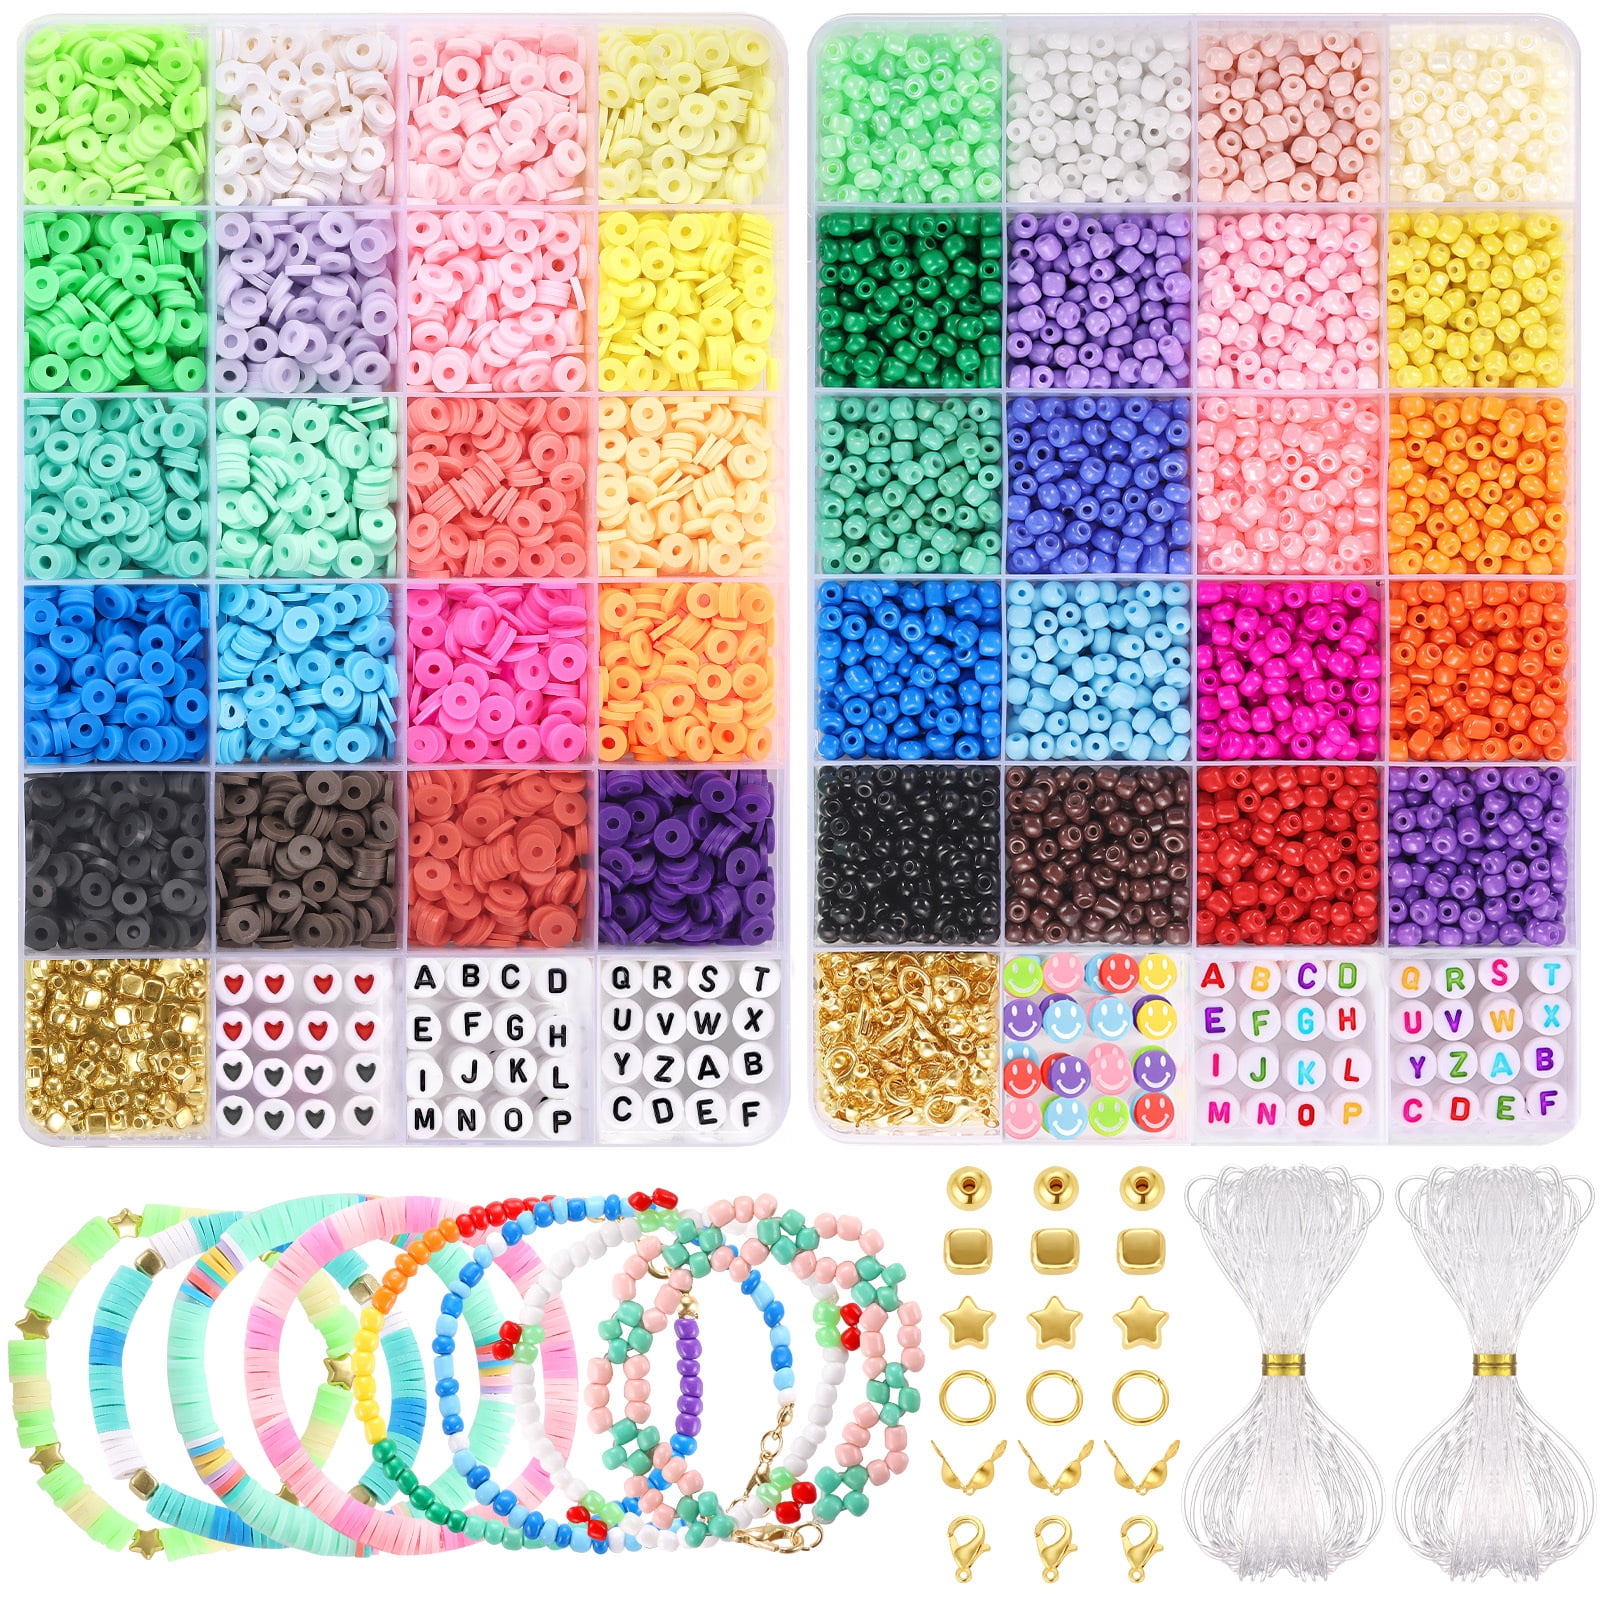  10 Strands Pearlescent Color Clay Beads, Funtopia 3200 Pcs  Heishi Beads Polymer Clay Beads Strands, Flat Round Disc Clay Beads for  Bracelets Jewelry Making (10 Colors, 6mm) : Arts, Crafts & Sewing